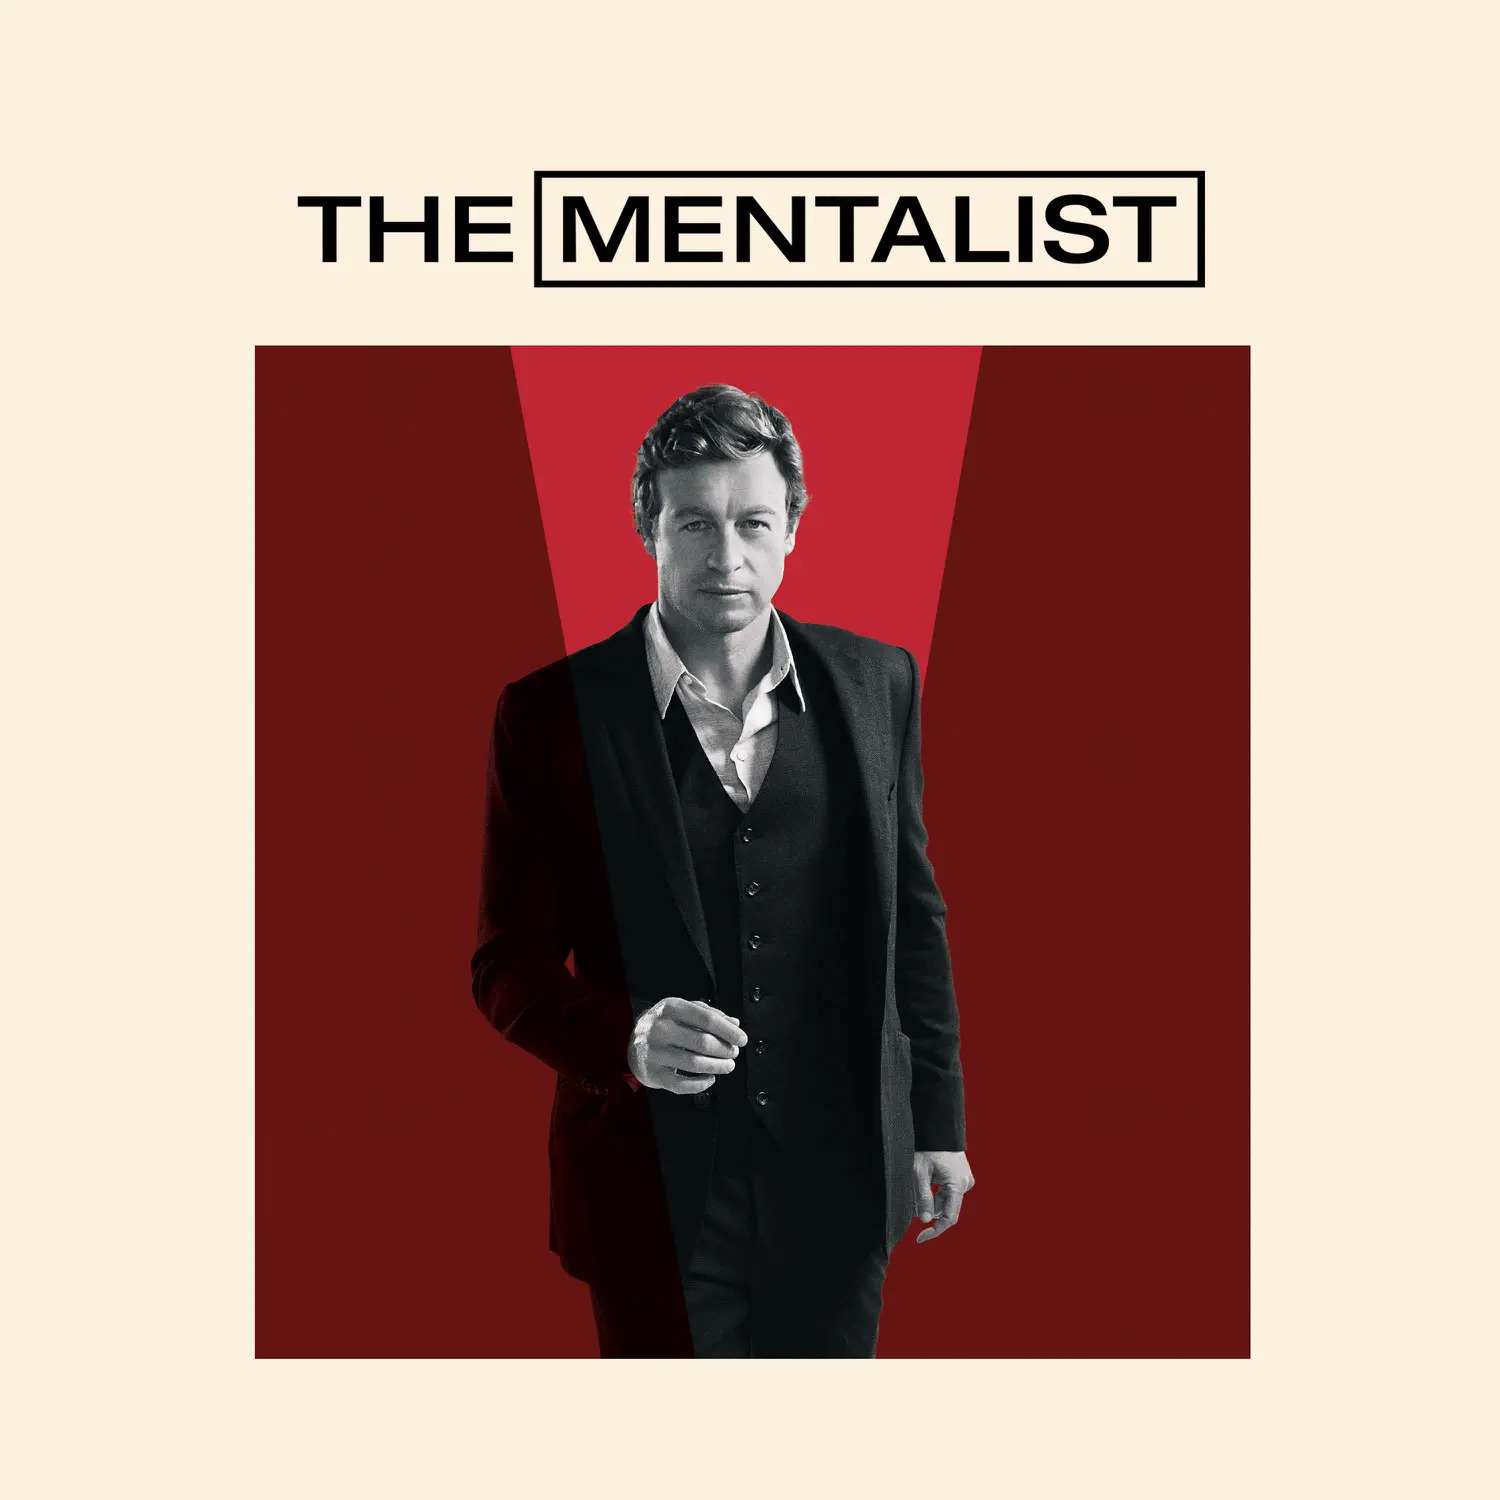 The Mentalist: The Complete Series $39.99